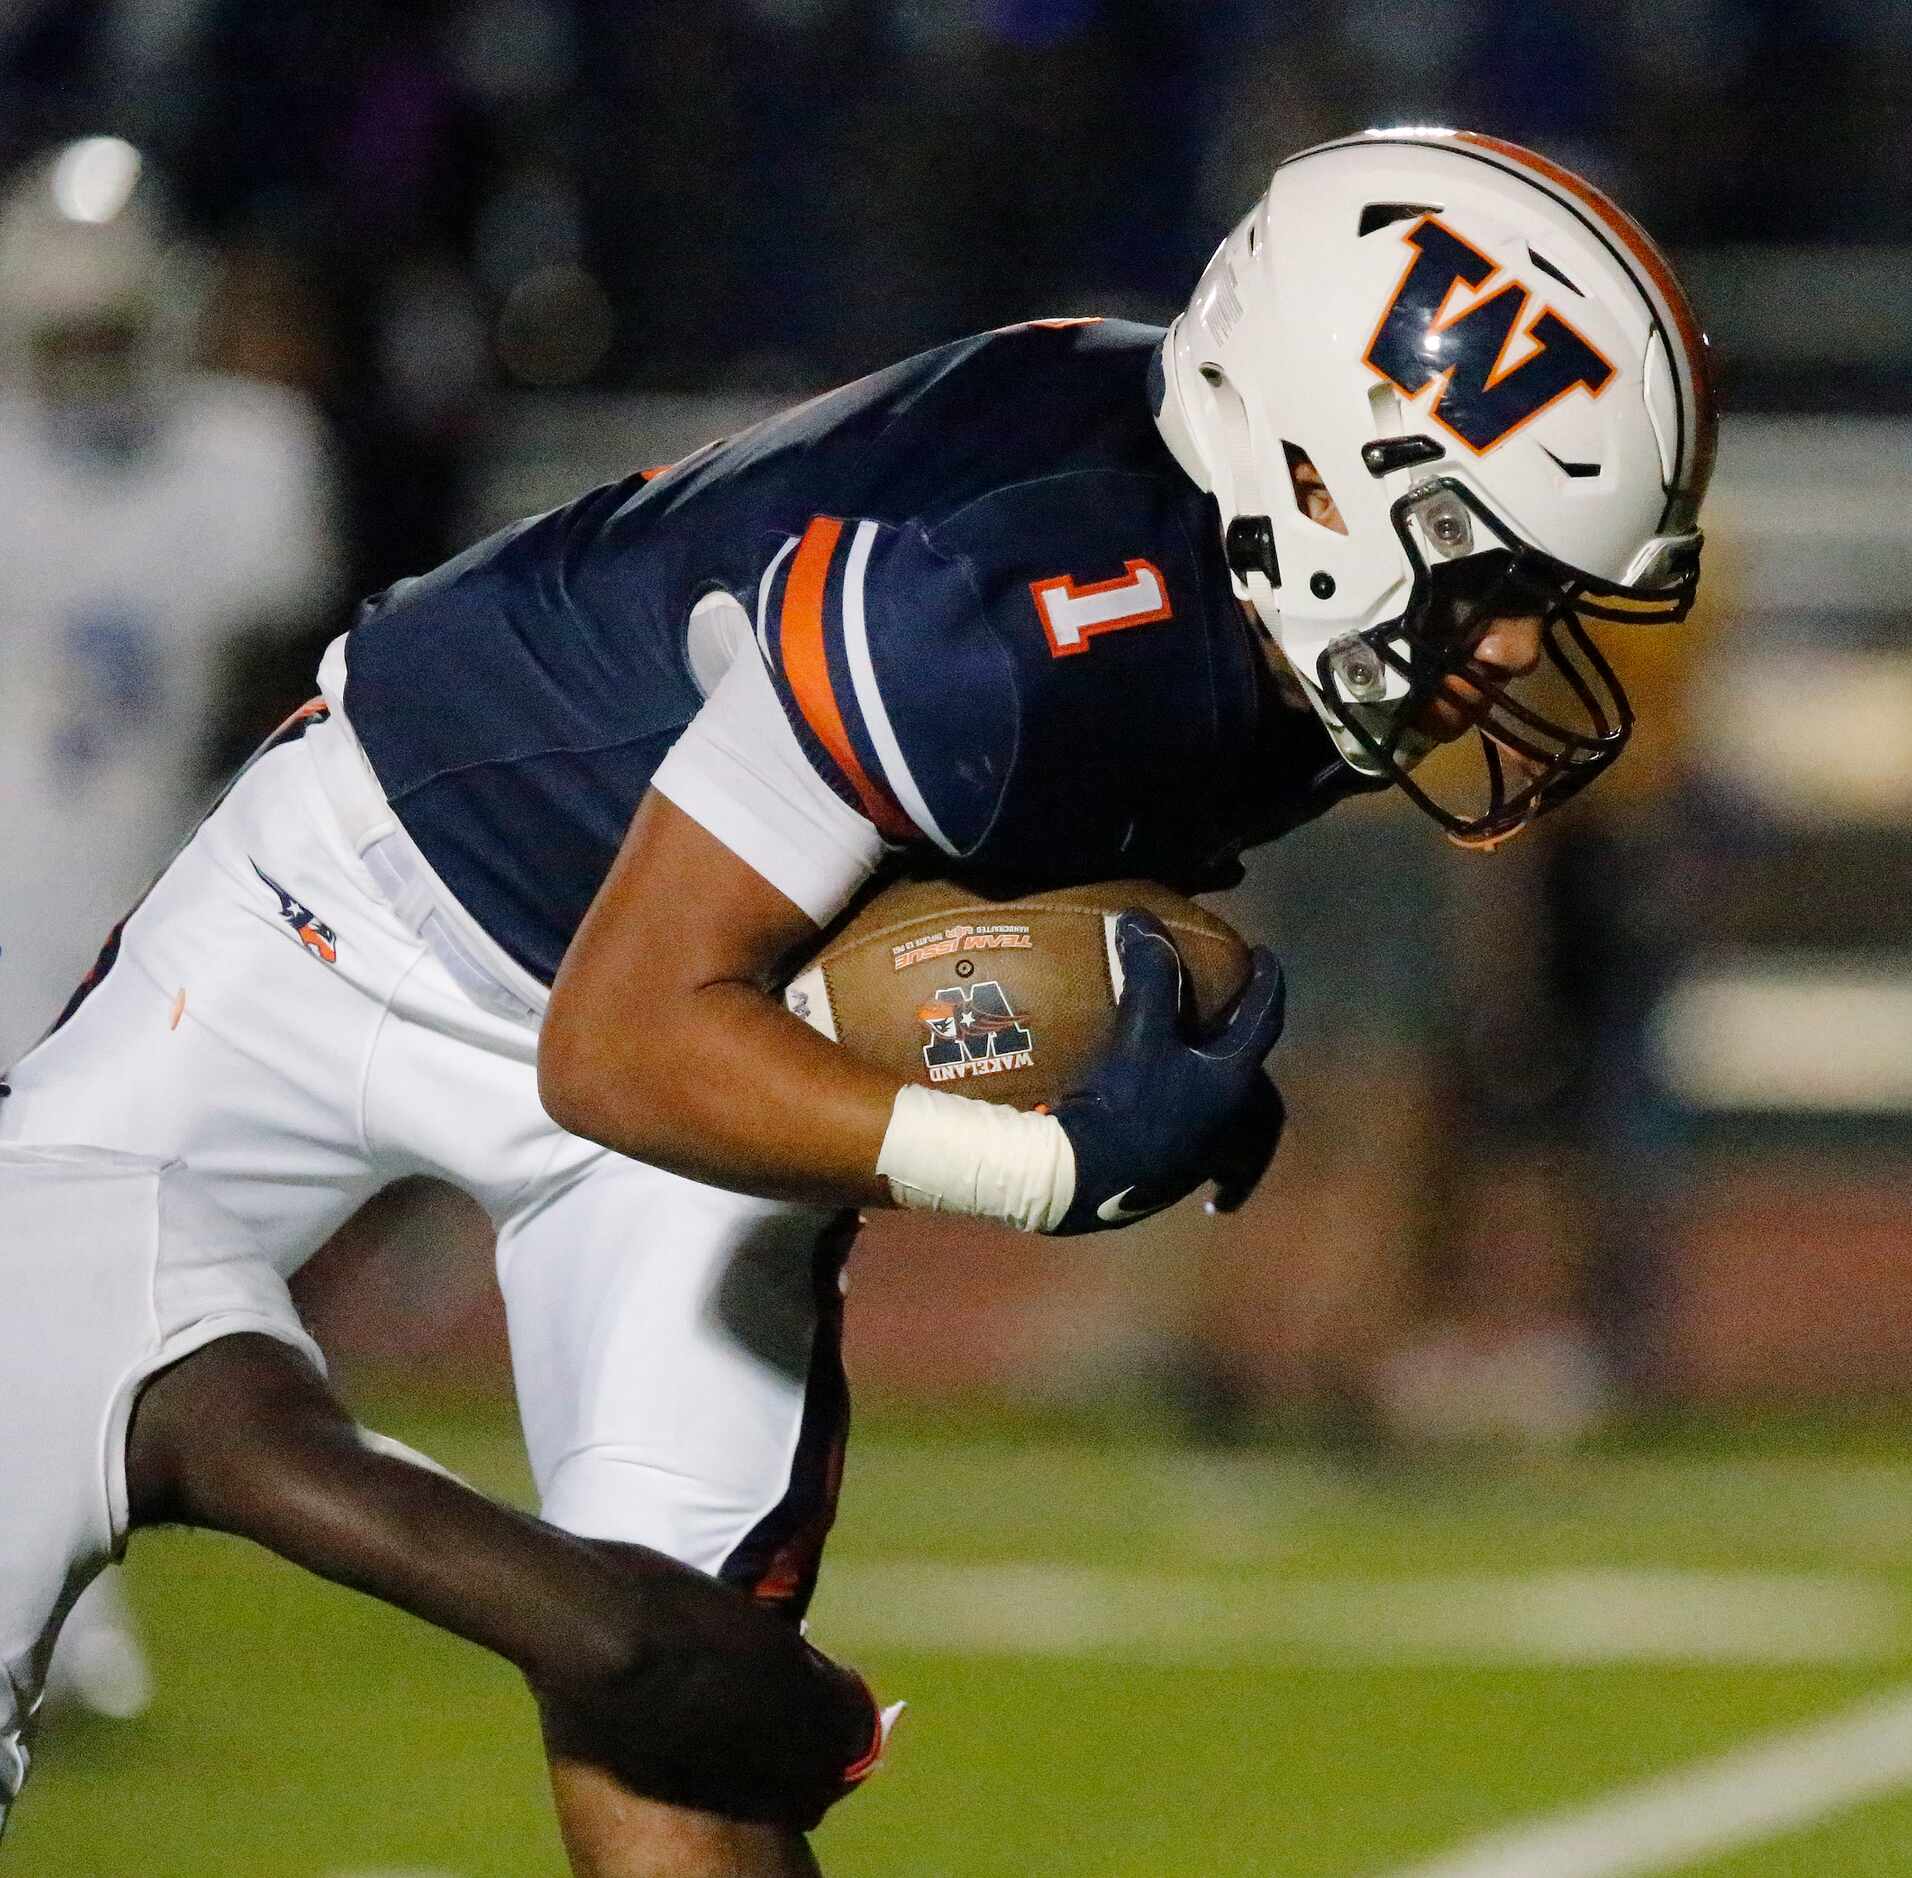 Wakeland High School wide receiver Donovan Woolen (1) is tackled after a catch during the...